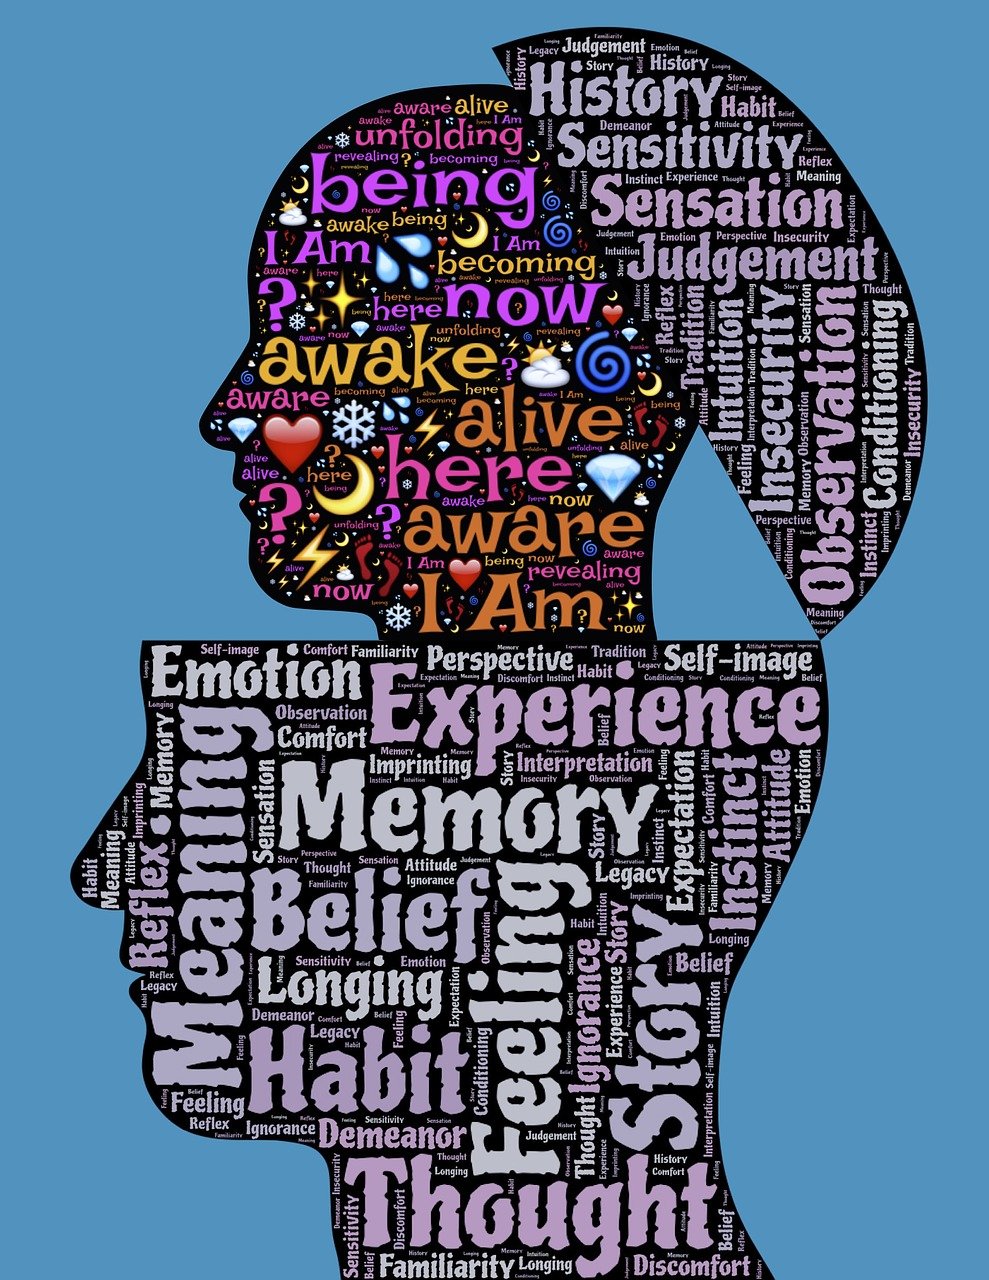 a silhouette of a person's head with words all over it, a picture, conceptual art, holographic memories, dementia, albuquerque, chakra diagram face